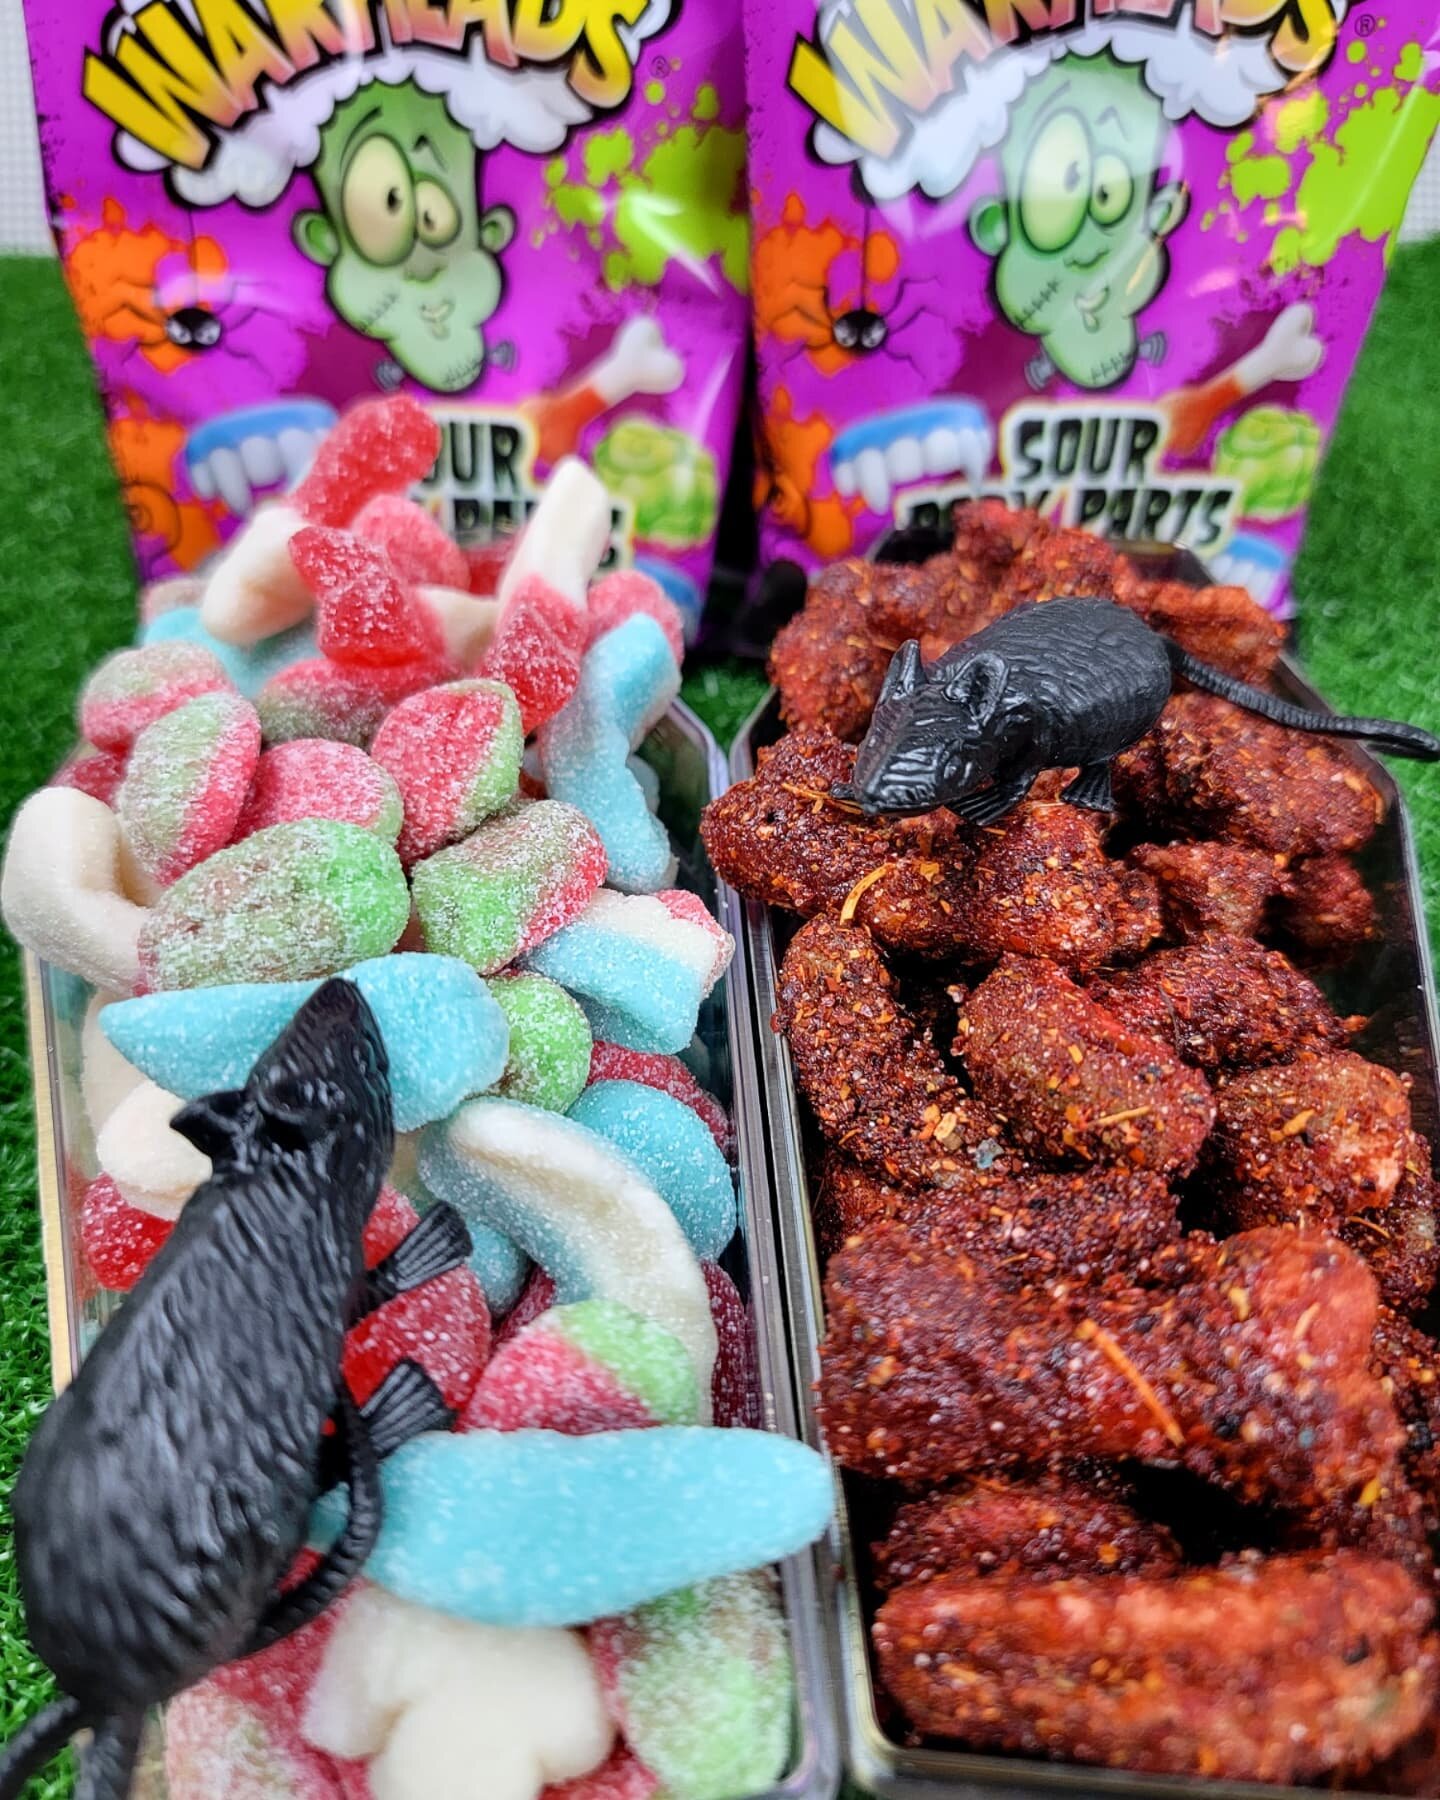 It's officially 𝙎𝙋𝙊𝙊𝙆𝙔 𝙎𝙀𝘼𝙎𝙊𝙉!!! ☠🎃👻

Who's excited to purchase our limited edition Halloween candy!!?

We have 3 options:
Gummy eye balls
Nerds candy corn
Warheads Sour body parts

All Candies will exclusively come in our coffin contai